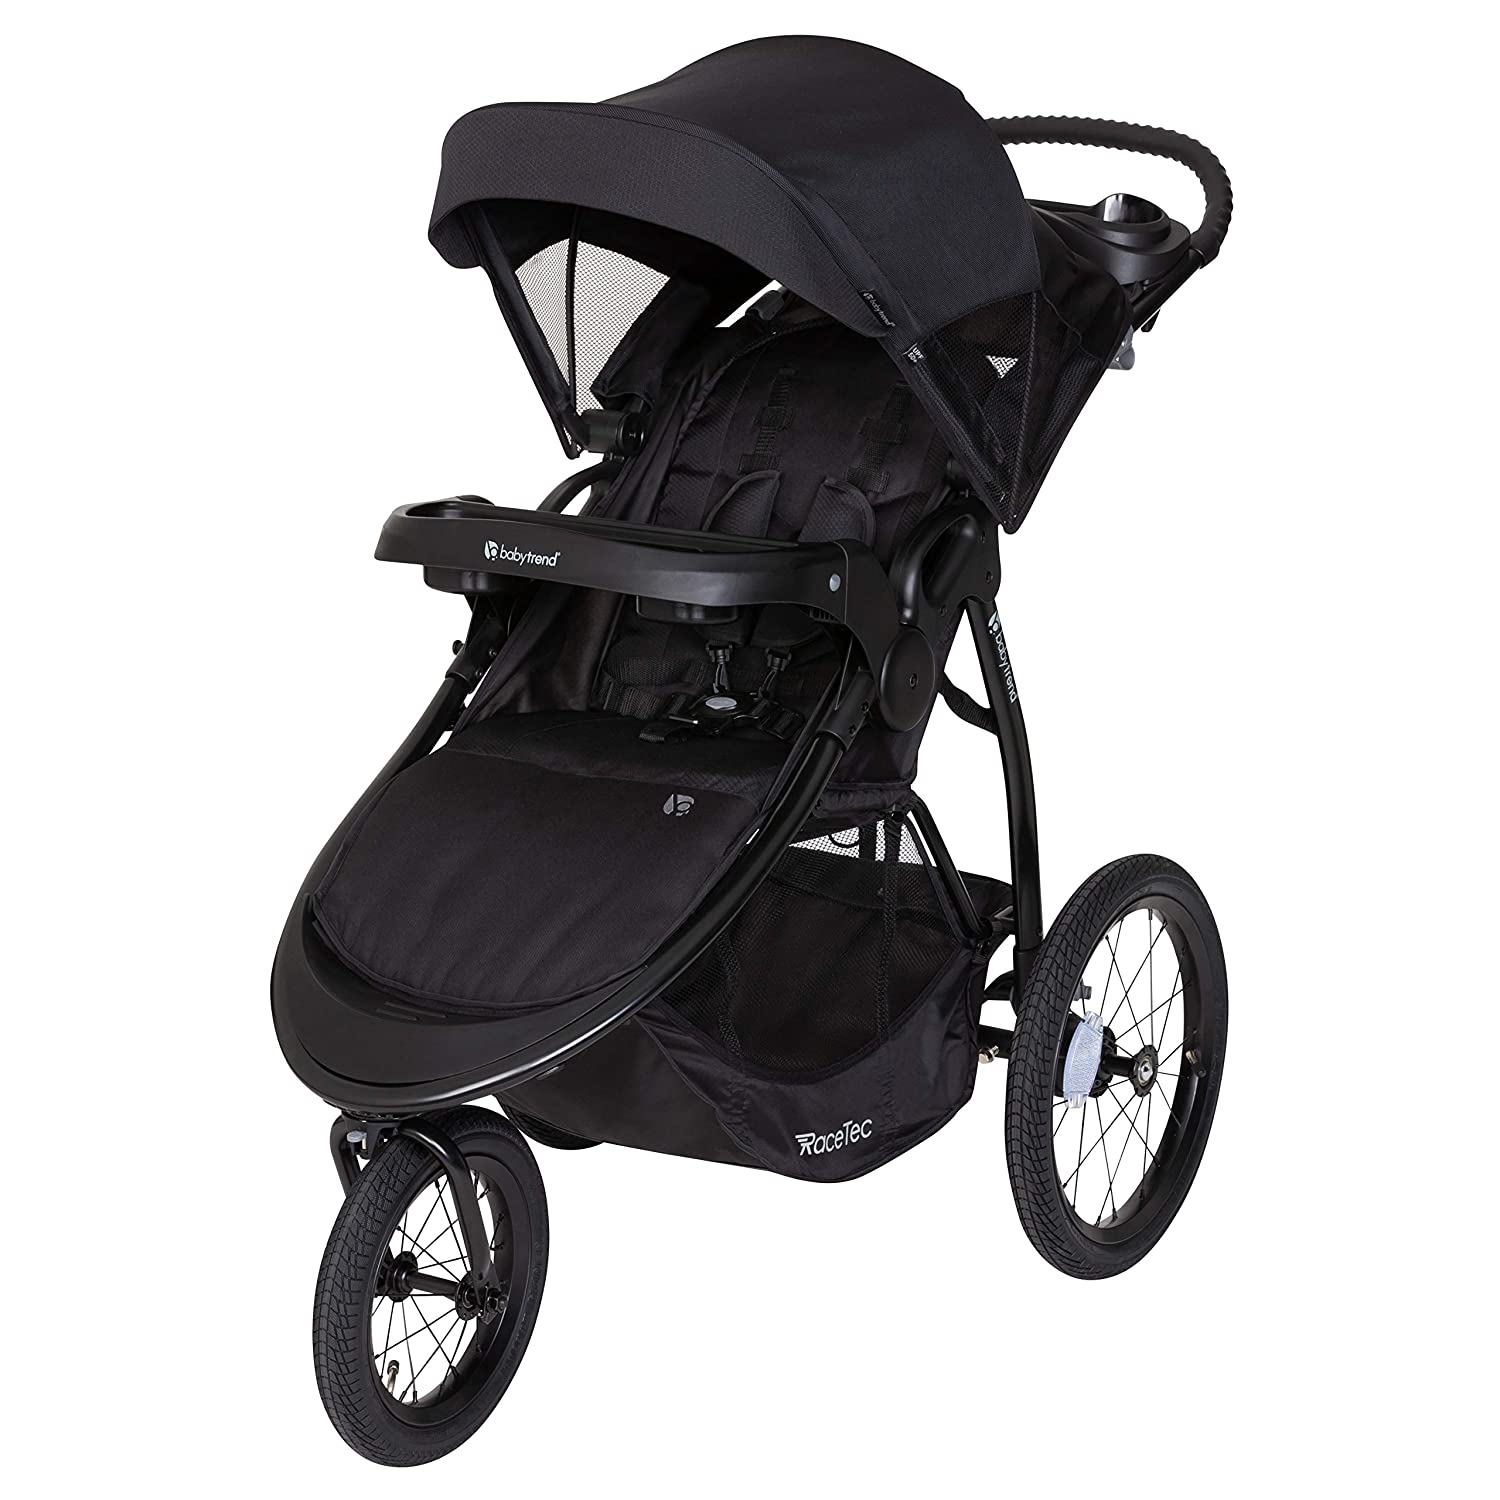 Baby Trend Expedition UPF 50+ Canopy Jogging Stroller